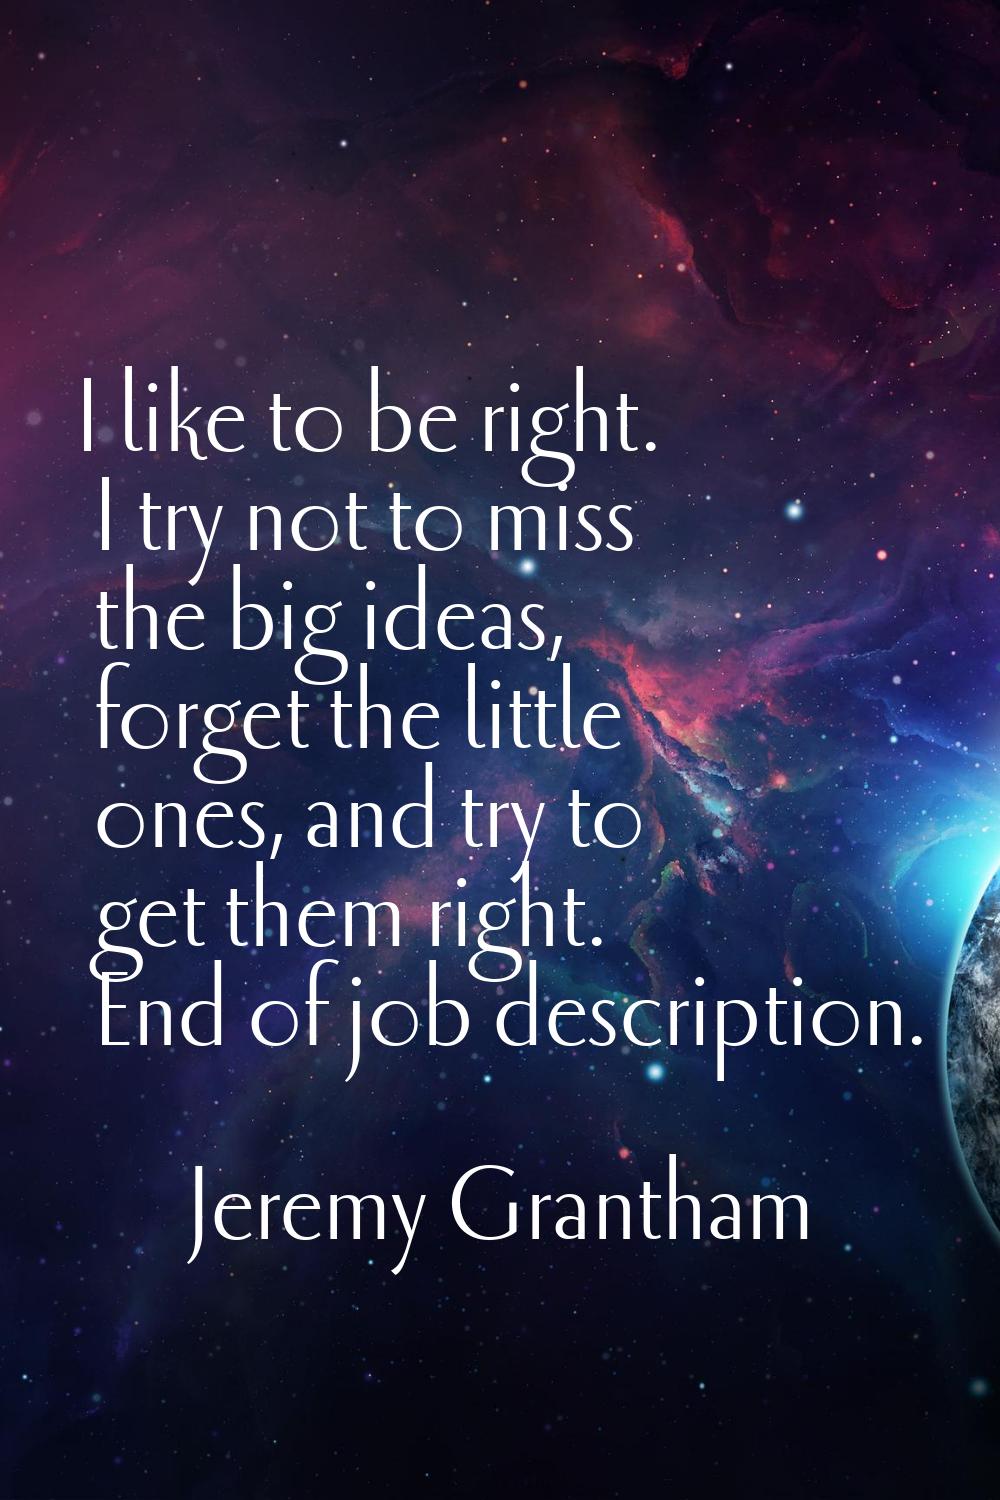 I like to be right. I try not to miss the big ideas, forget the little ones, and try to get them ri